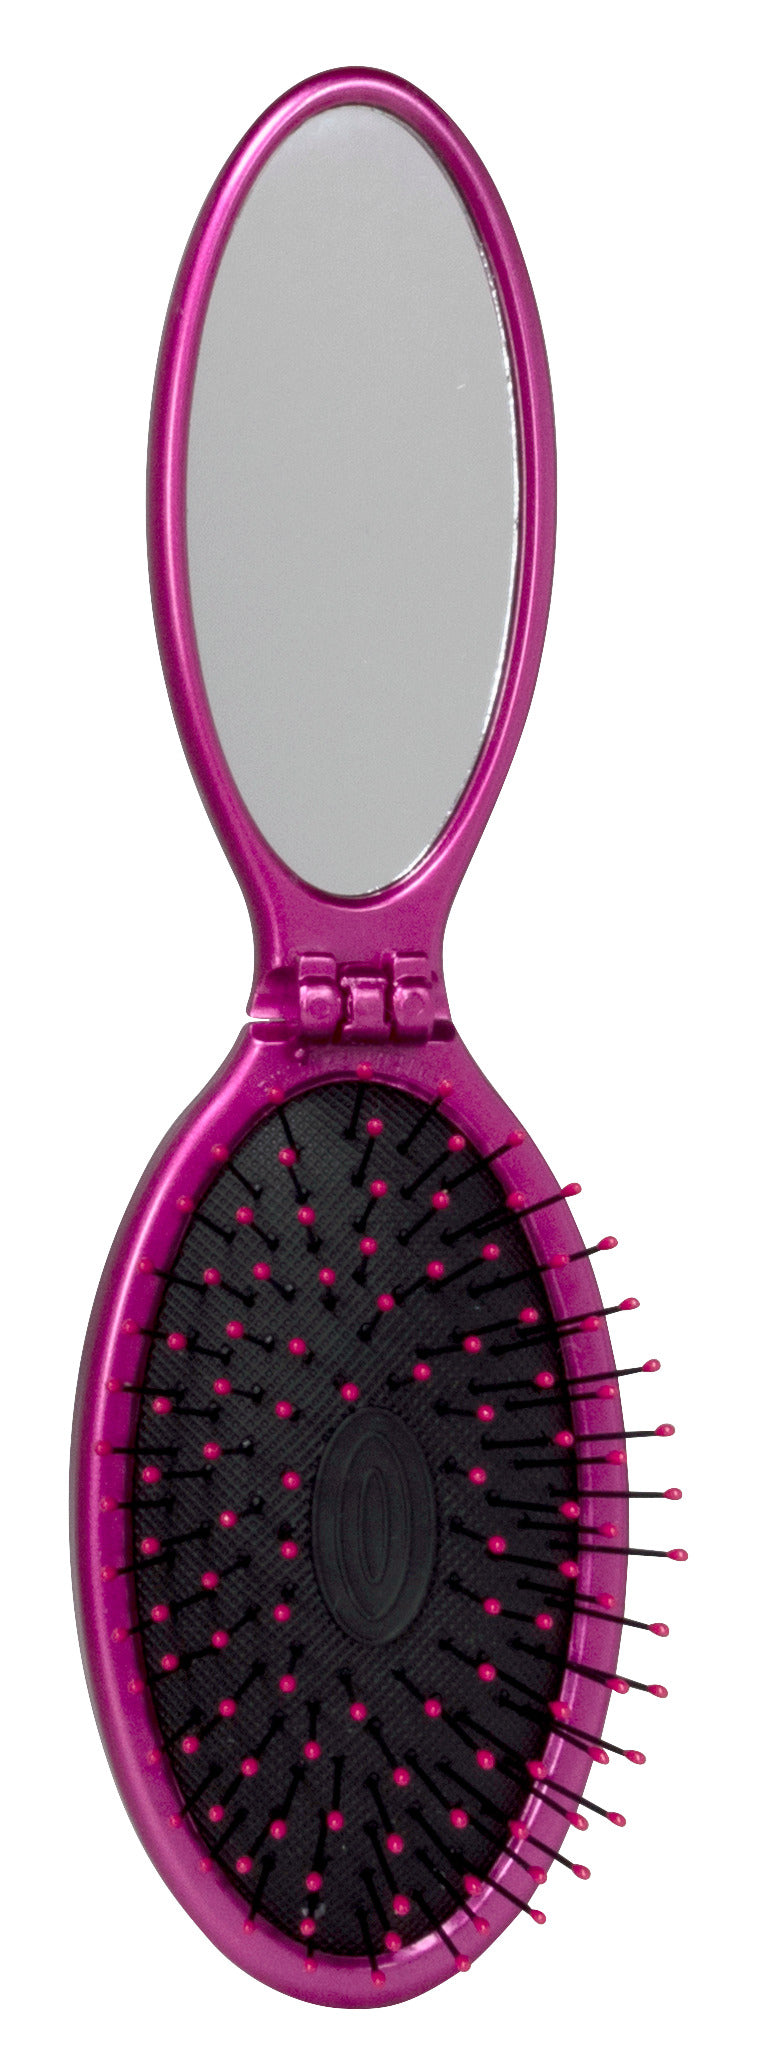 WetBrush Pop and Go - Pink